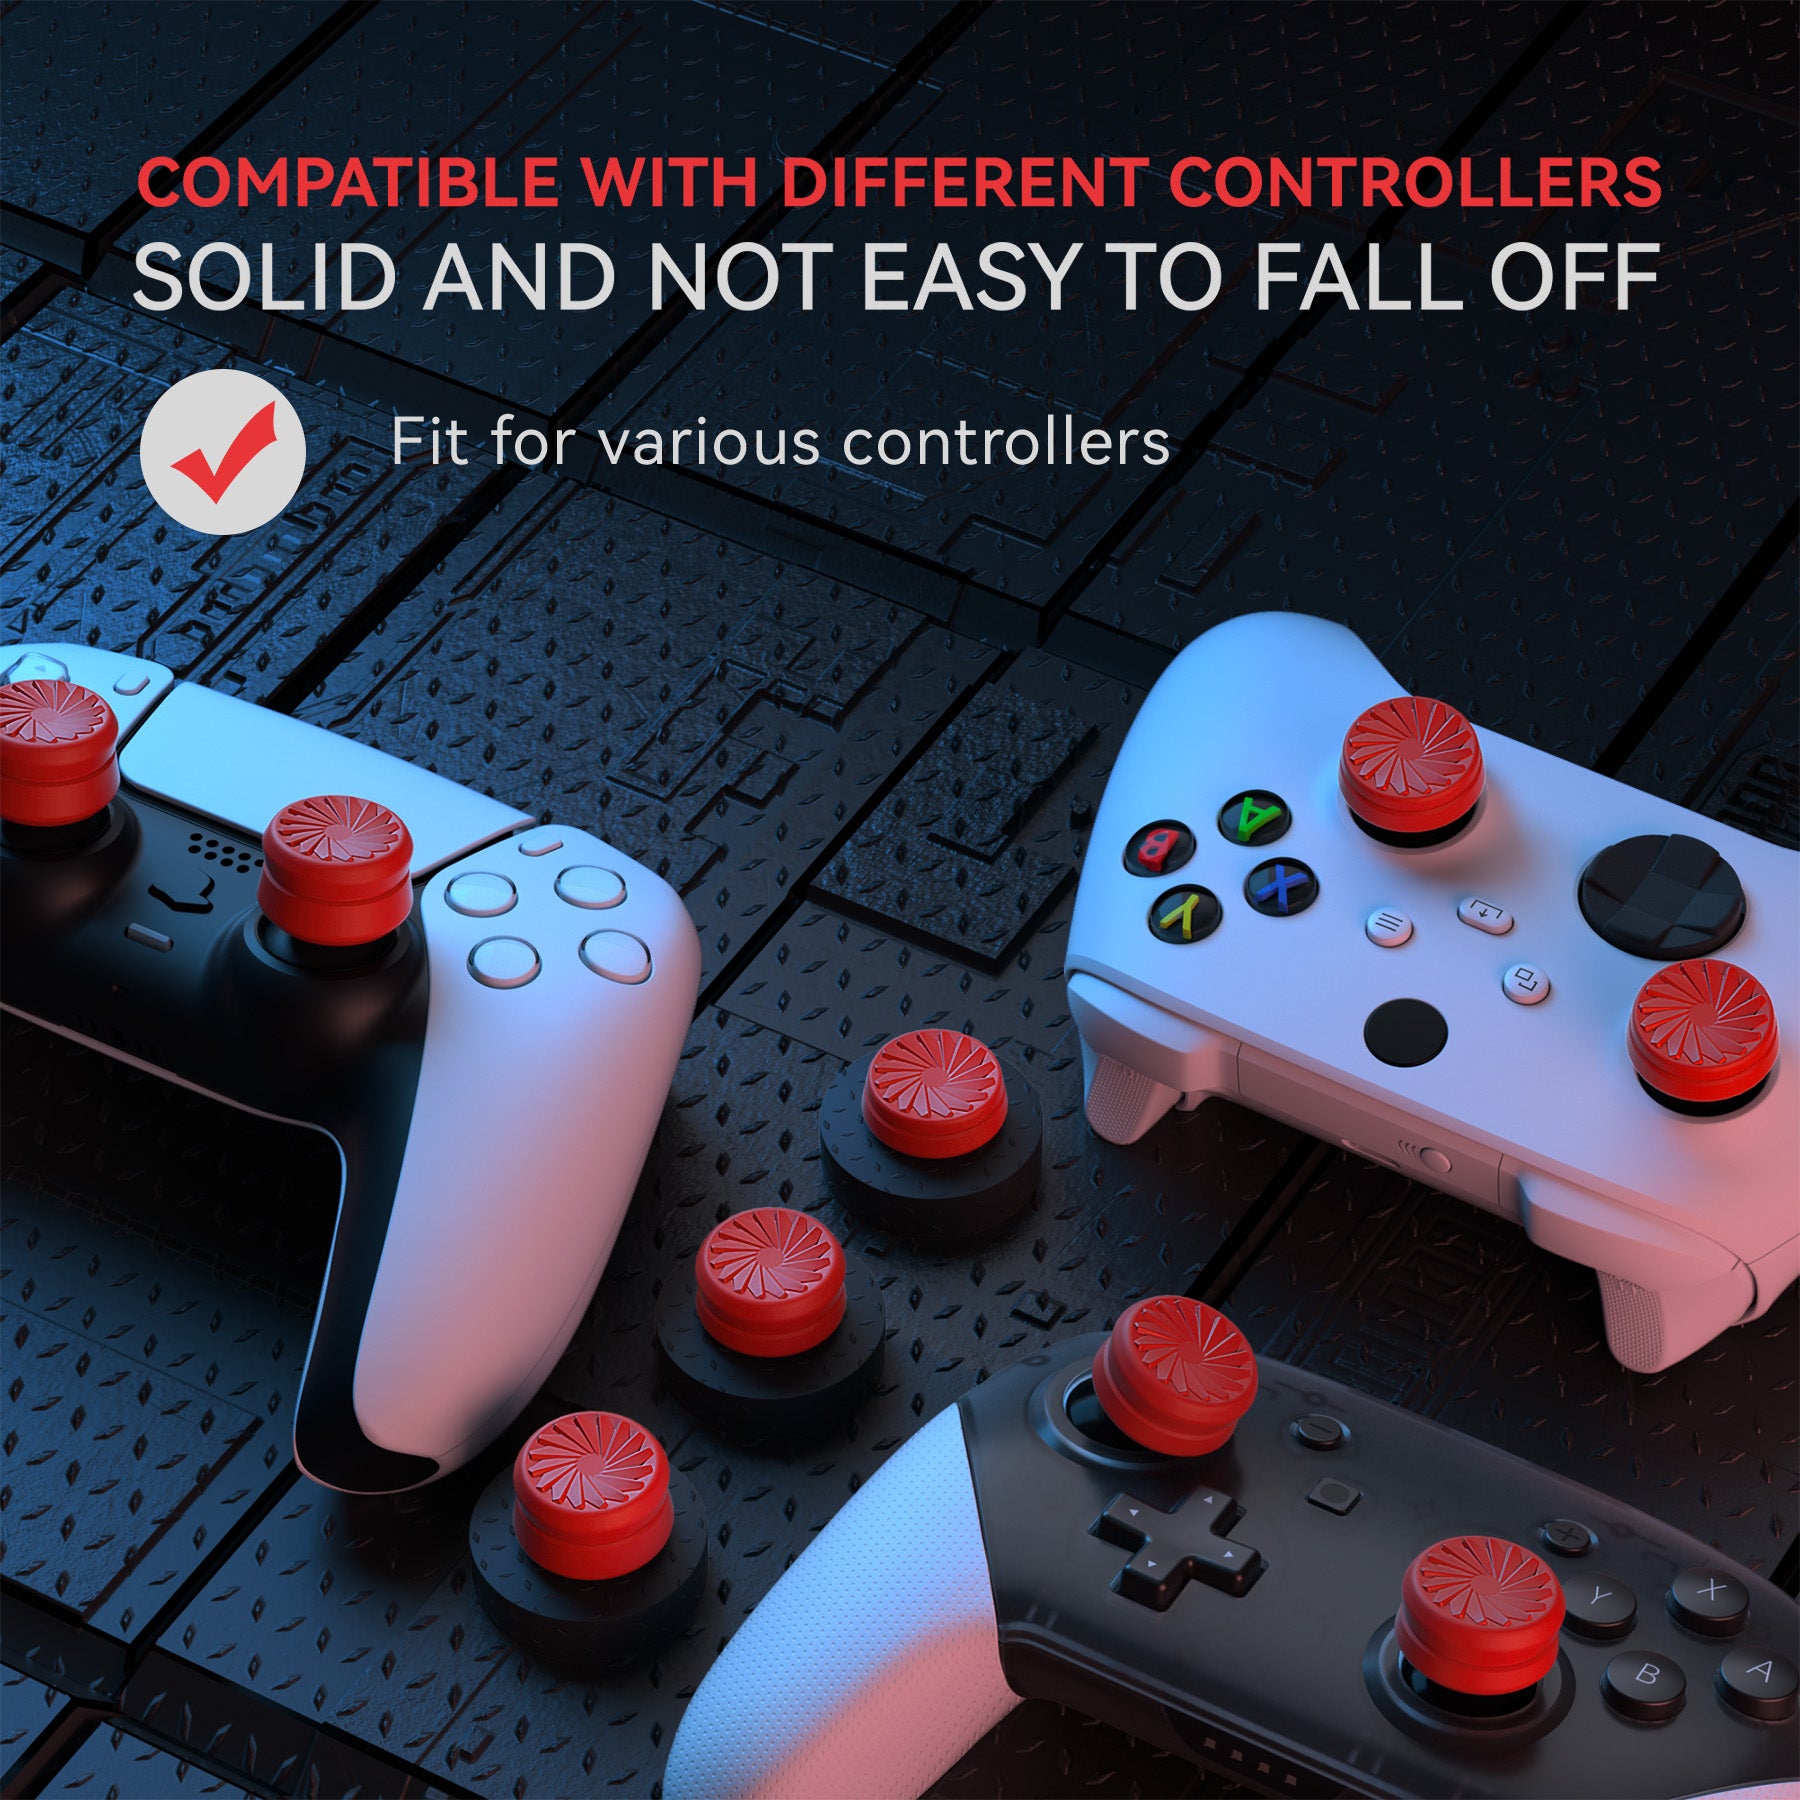 PlayVital 3 Height Turbine Thumbs Cushion Caps Thumb Grips for ps5, for ps4, Thumbstick Grip Cover for Xbox Core Wireless Controller, Thumb Grips for Xbox One, Elite Series 2, for Switch Pro - Passion Red - PJM3056 PlayVital